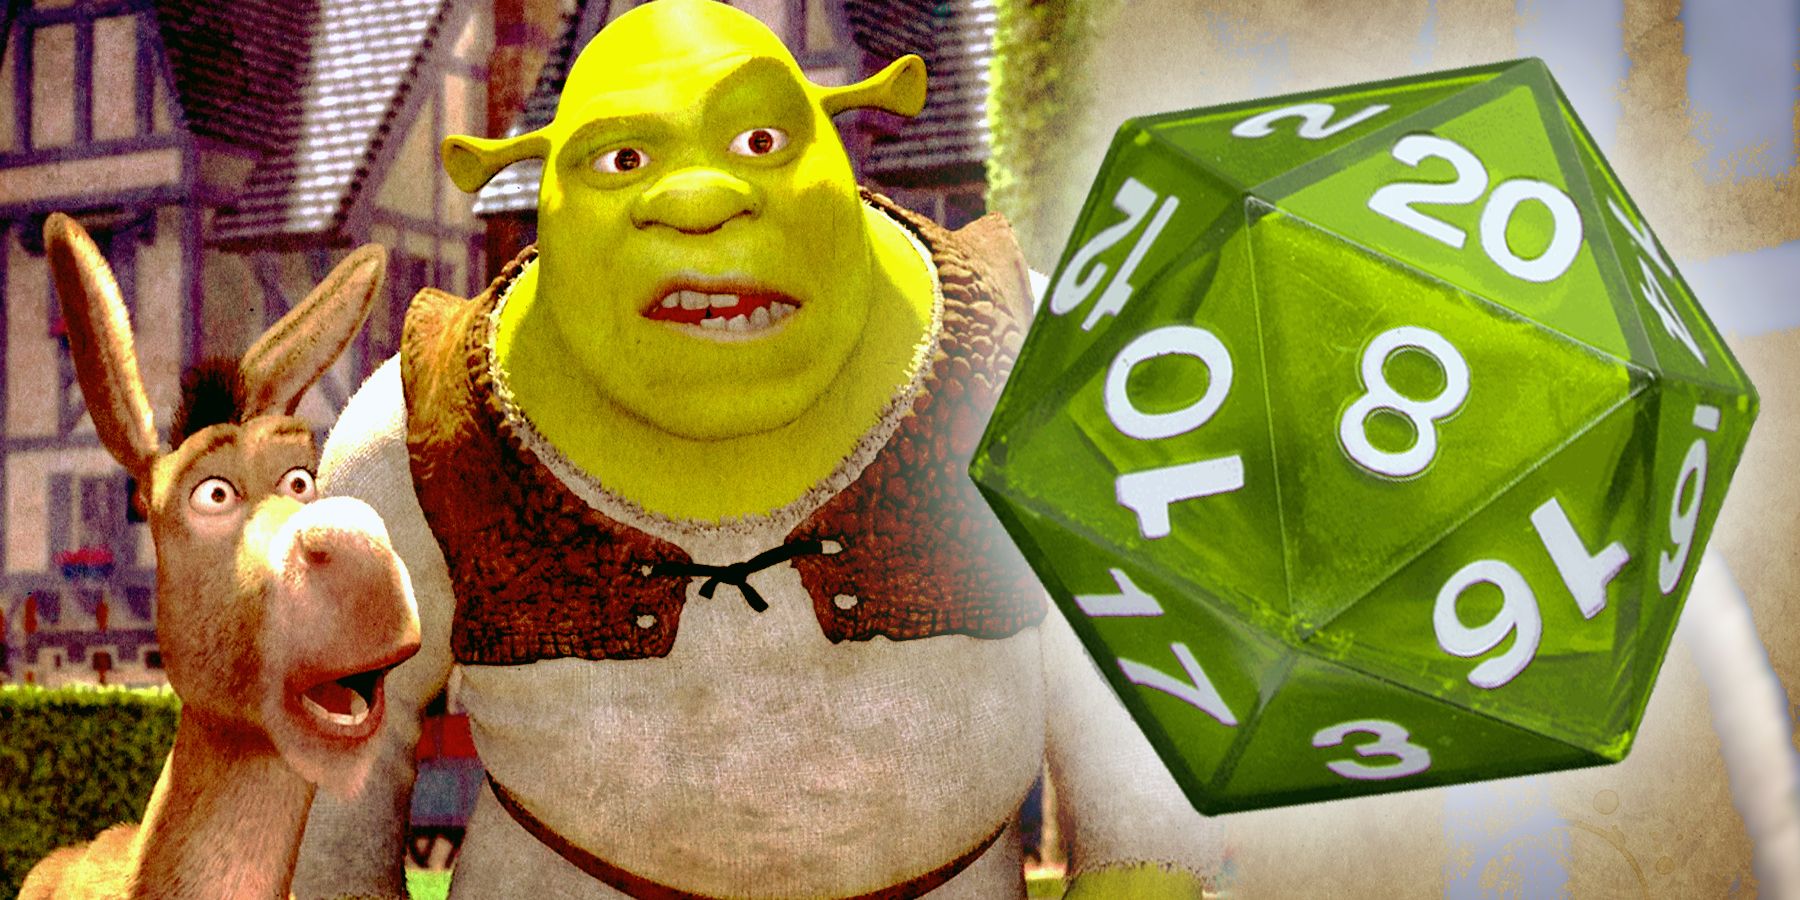 Shrek's Dungeons & Dragons Class Isn't What You'd Expect